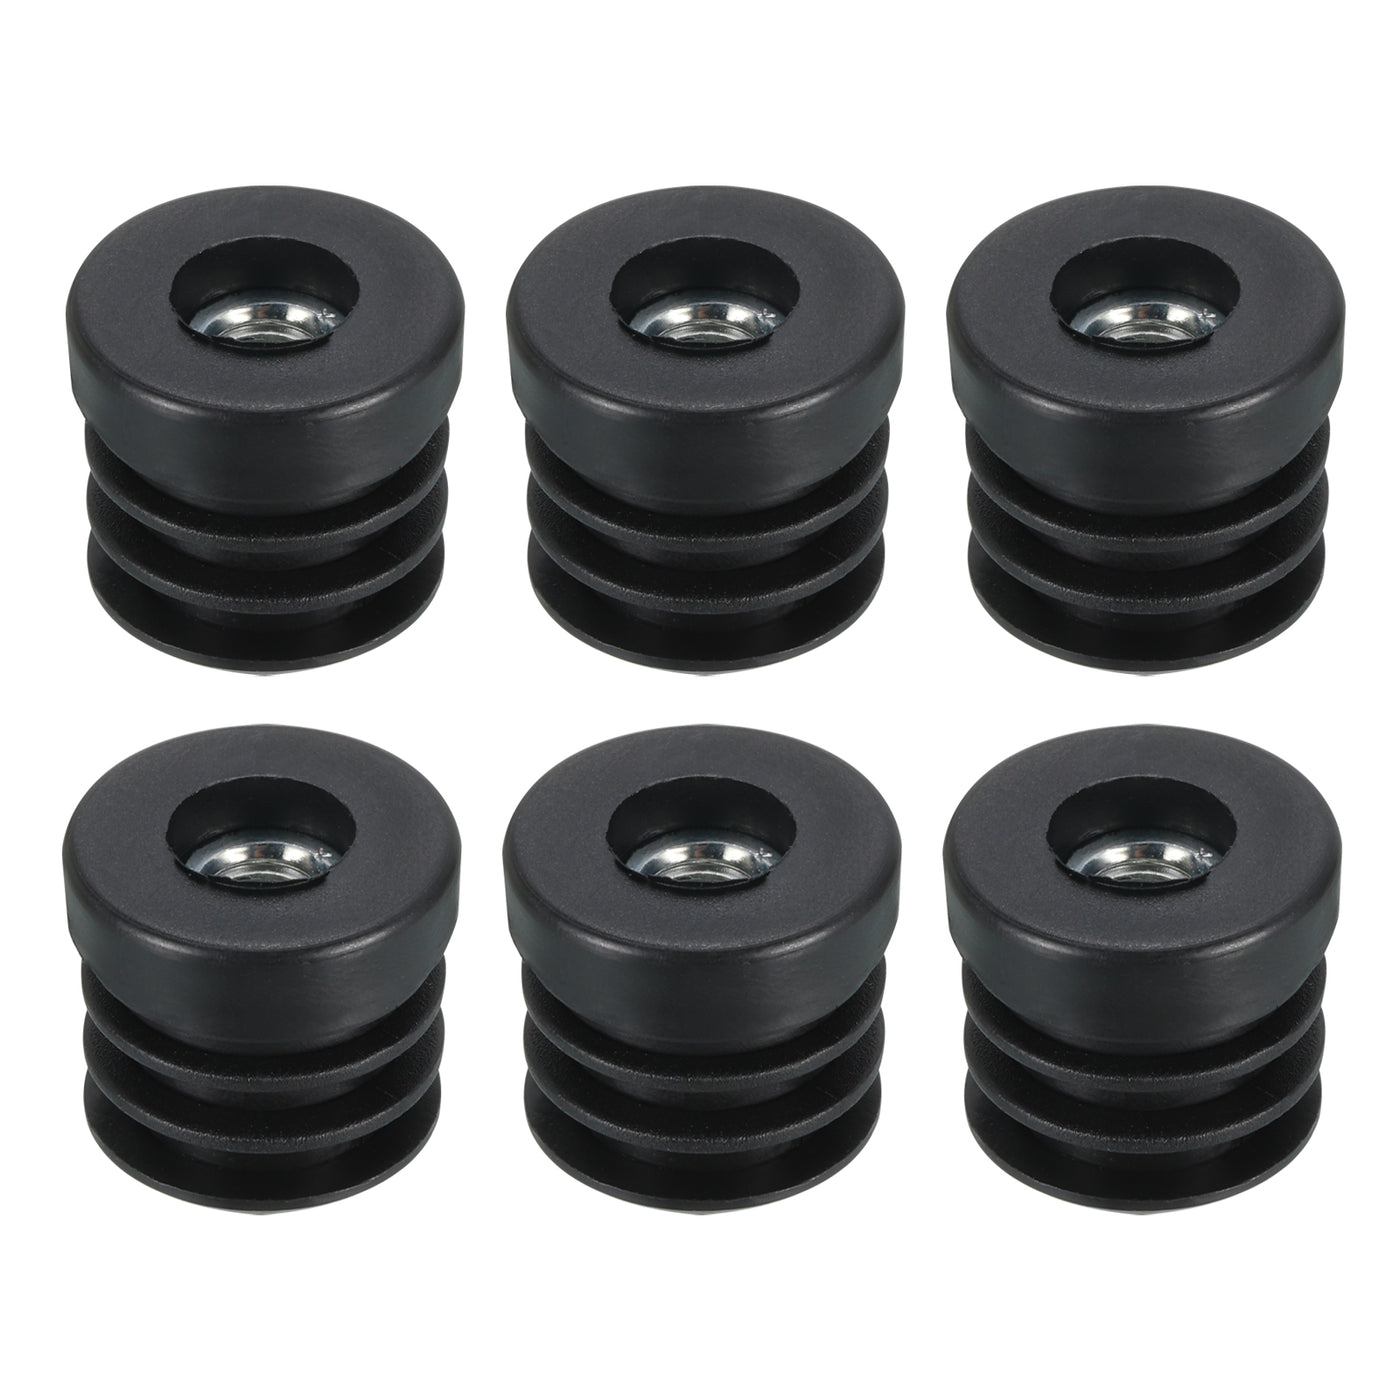 uxcell Uxcell 6Pcs Caster Insert with Thread, 25mm/0.98" M8 Thread for Furniture